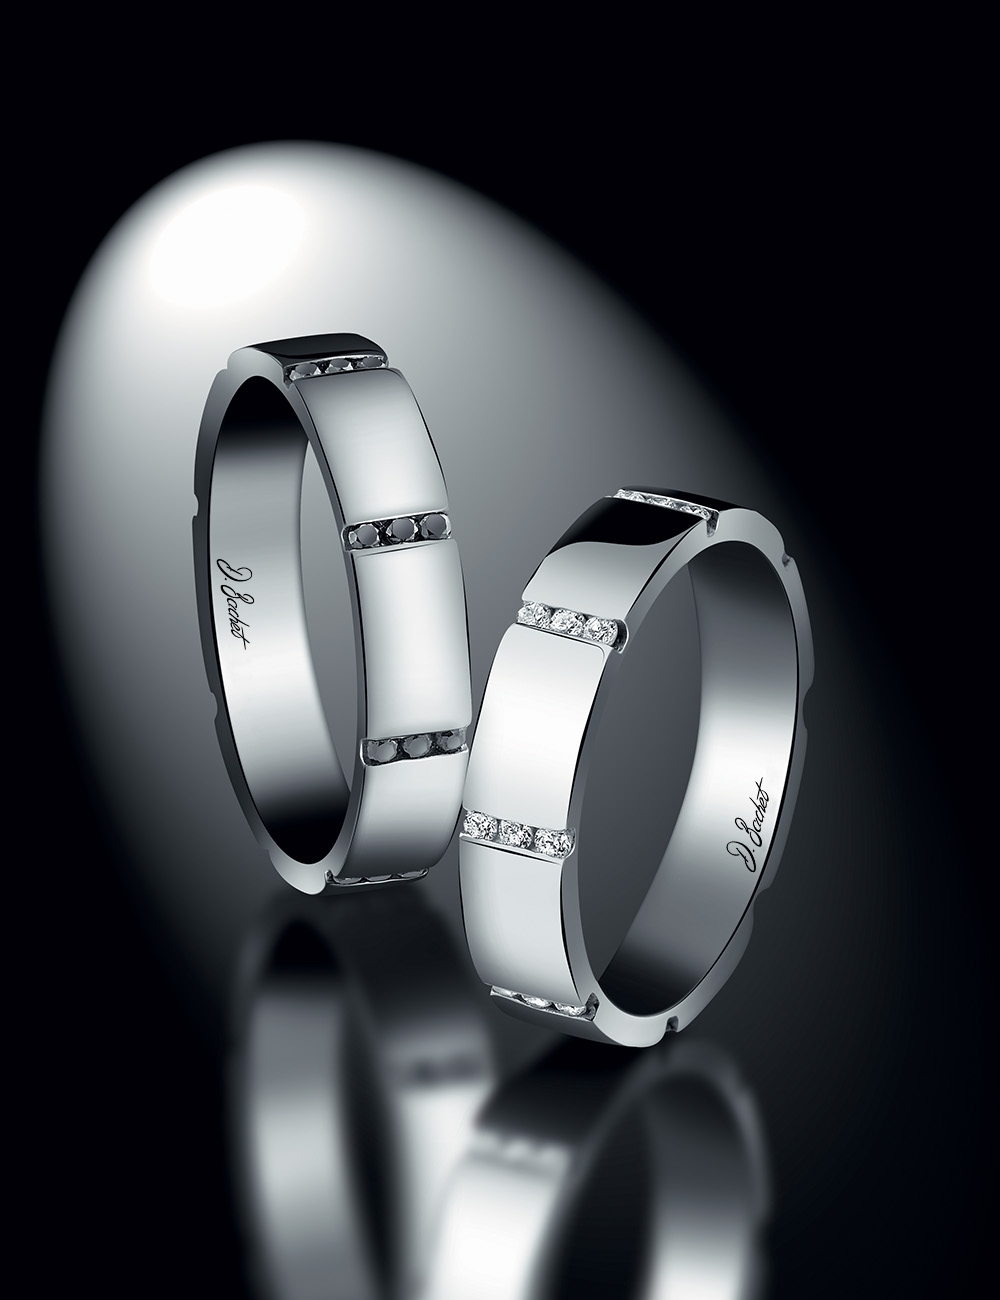 Modern, sophisticated women's wedding band, breaking conventions, with 8 rows of white diamonds symbolizing eternal unity.